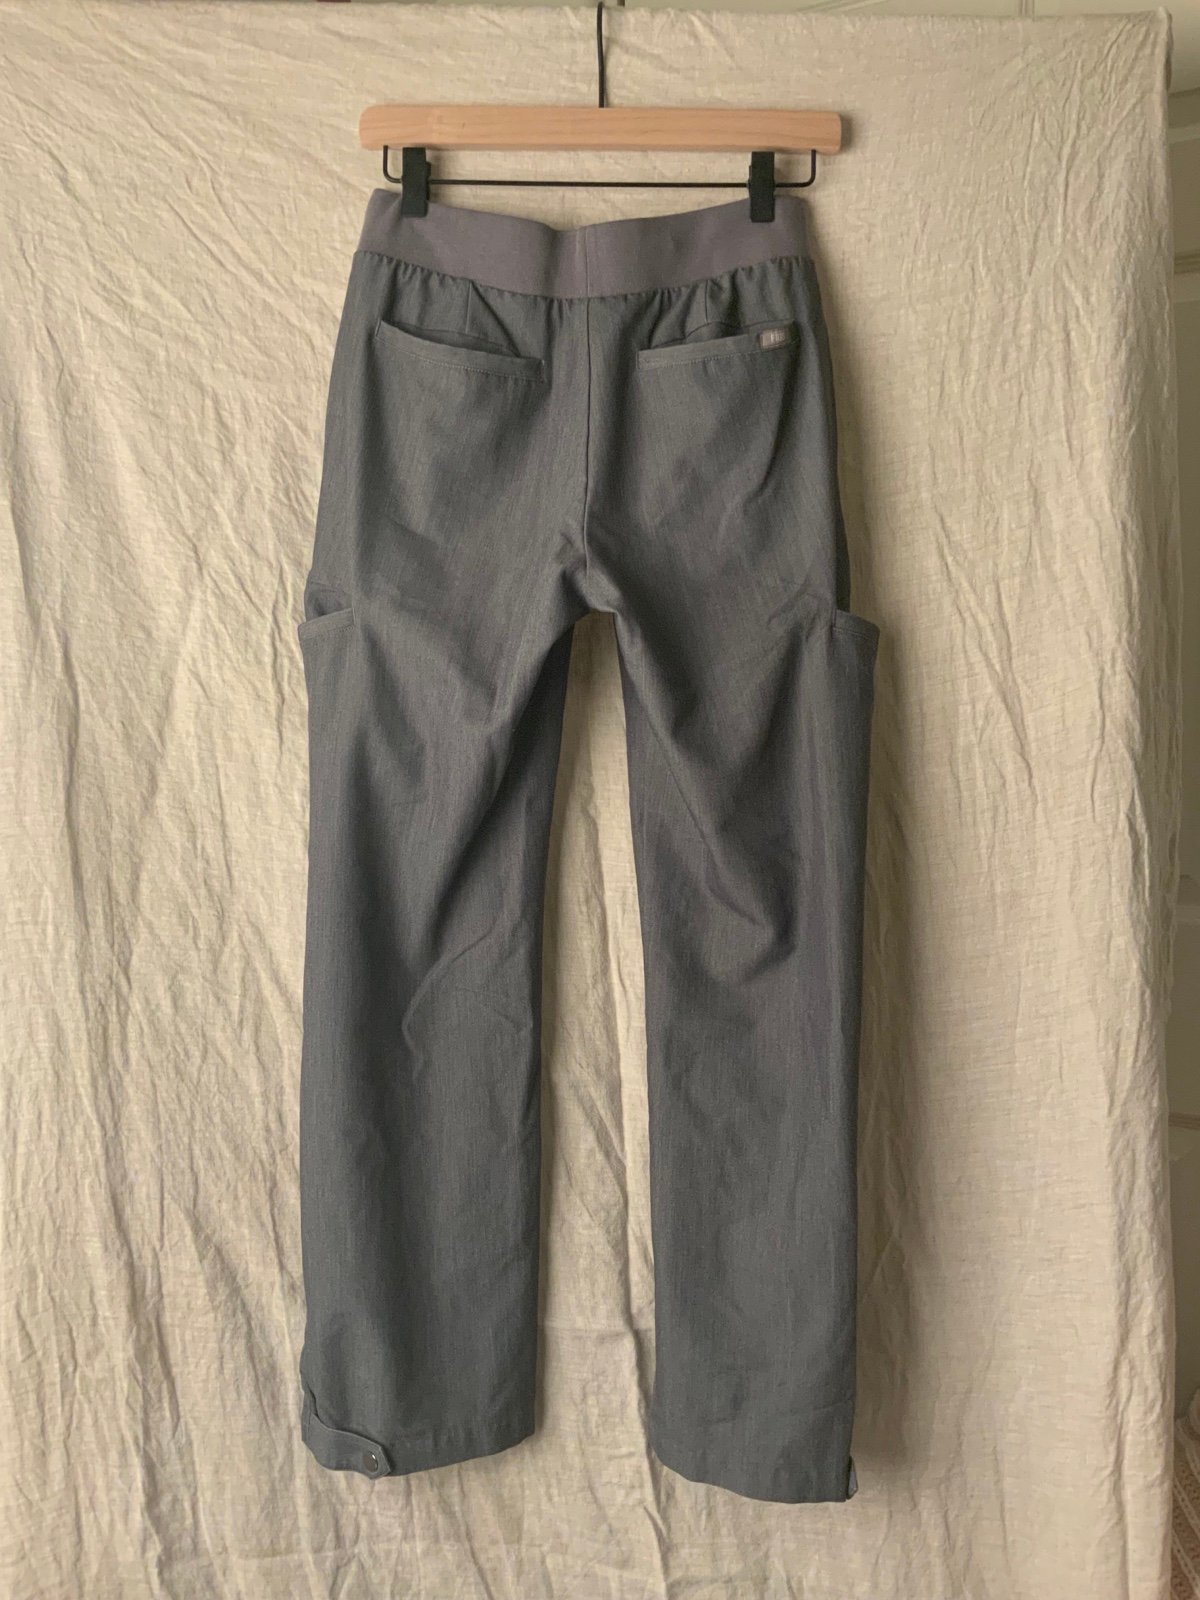 FIGS Technical Collection Scrub Pants Size XSmall Bh4rOB0nM